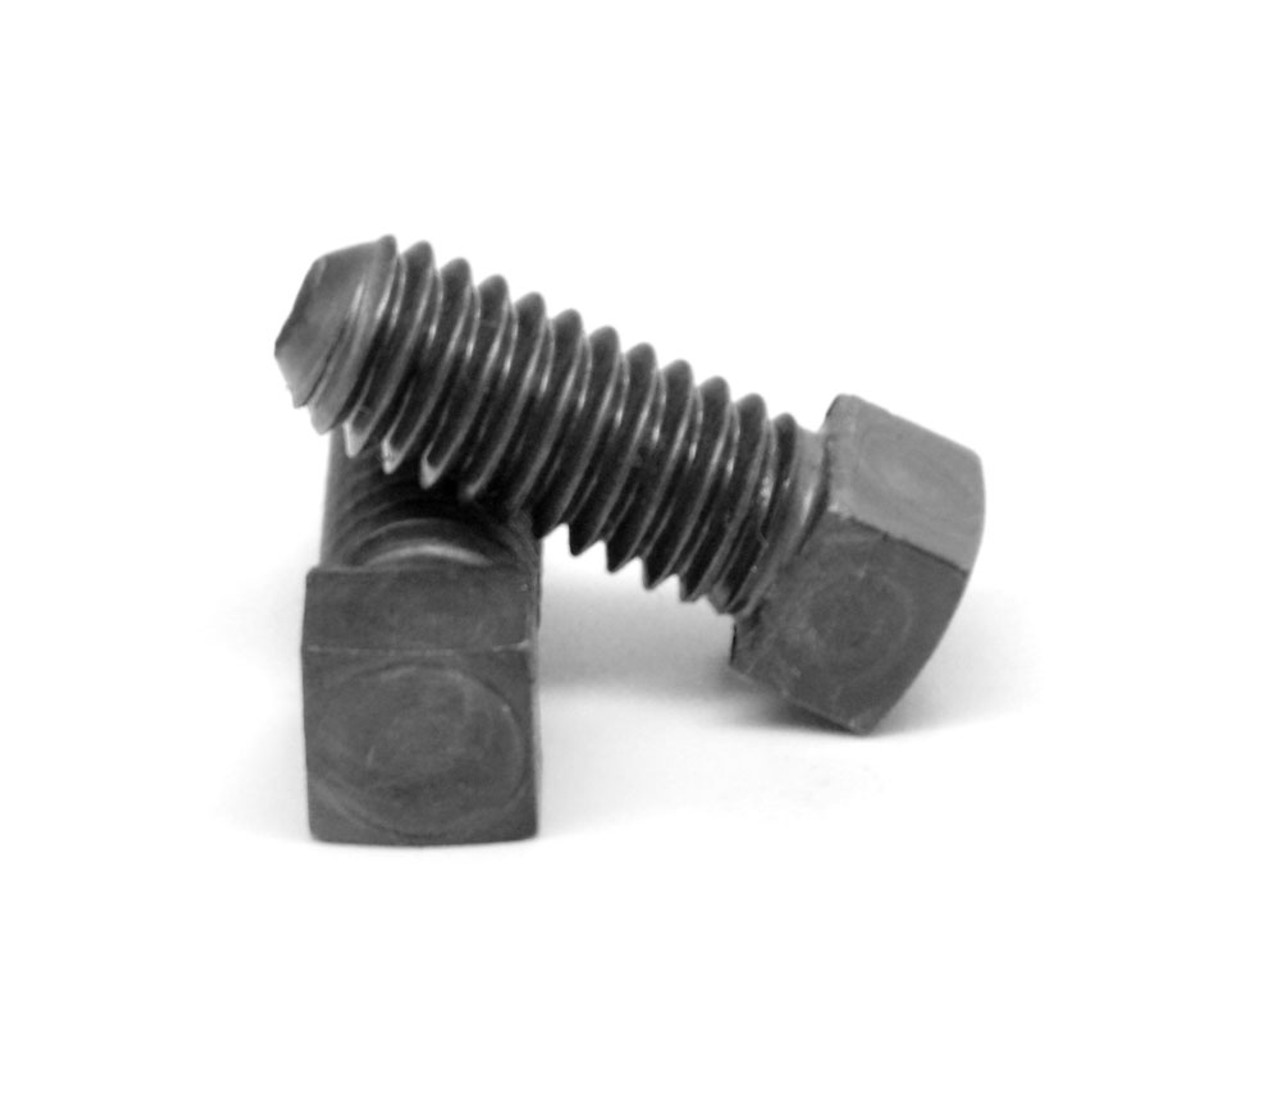 1 1/8"-7 x 8" (FT) Coarse Thread Square Head Set Screw Cup Point Low Carbon Steel Case Hardened Plain Finish